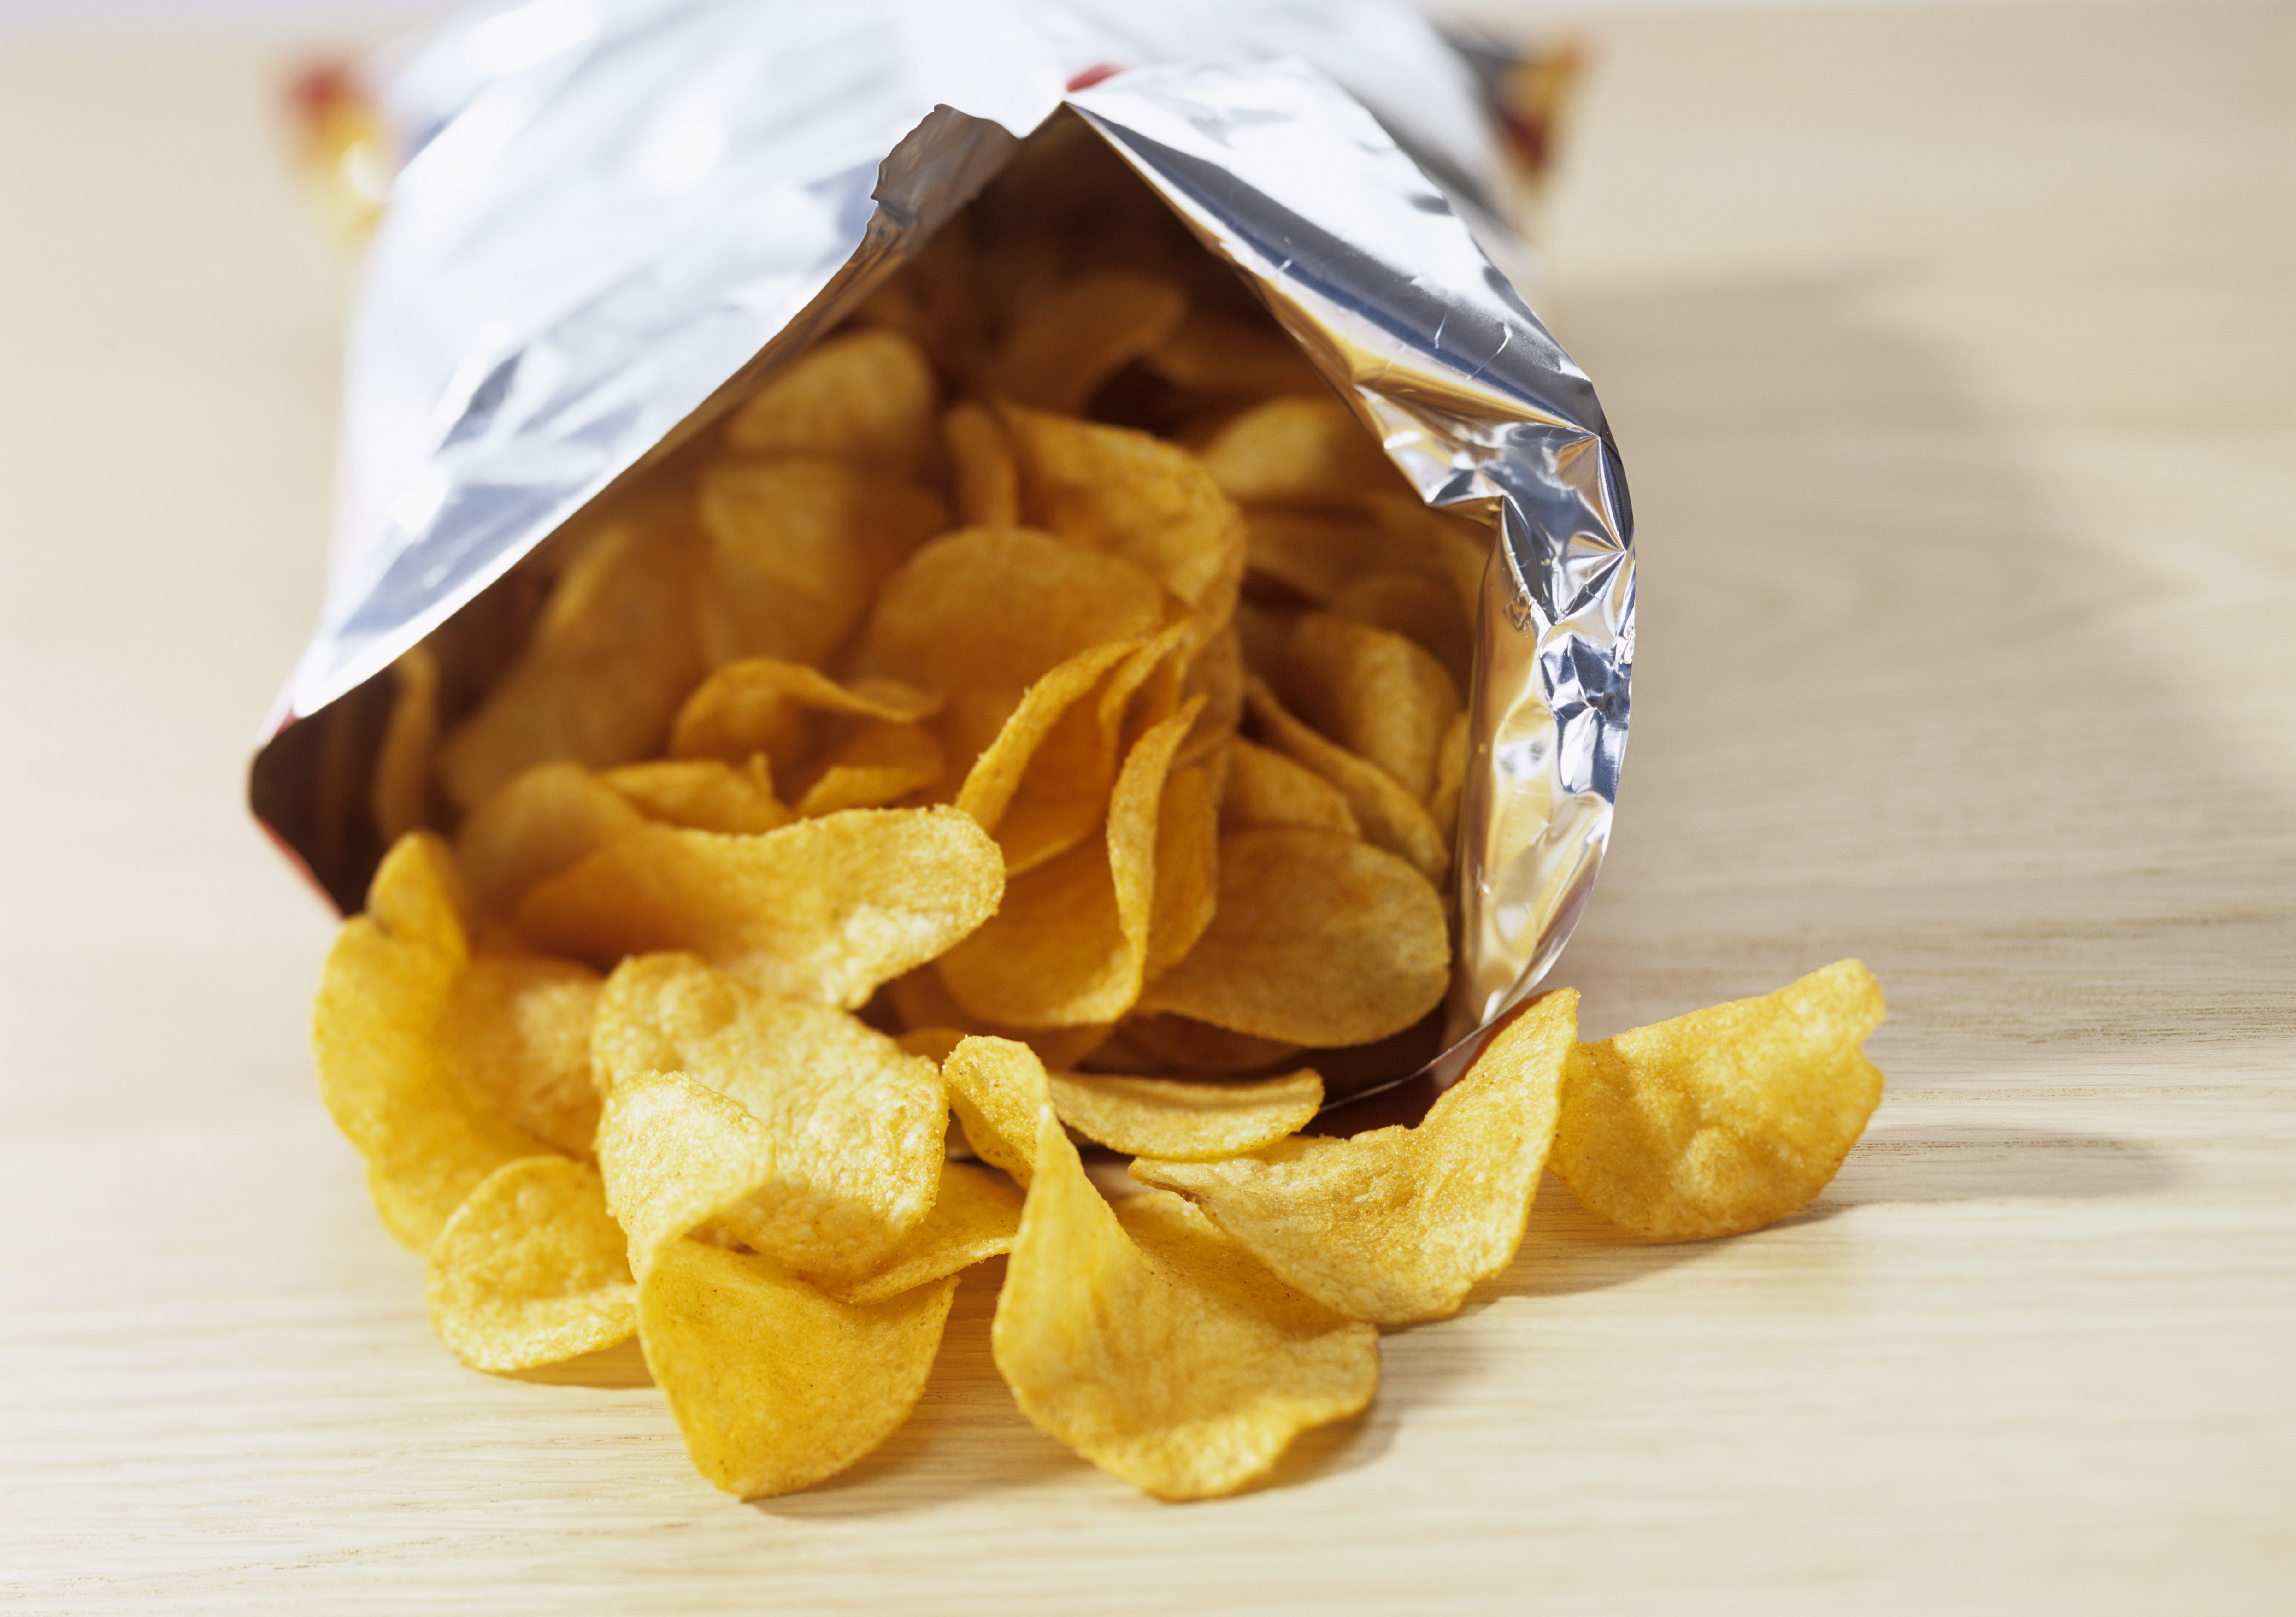 What foods cause nightmares? Chips